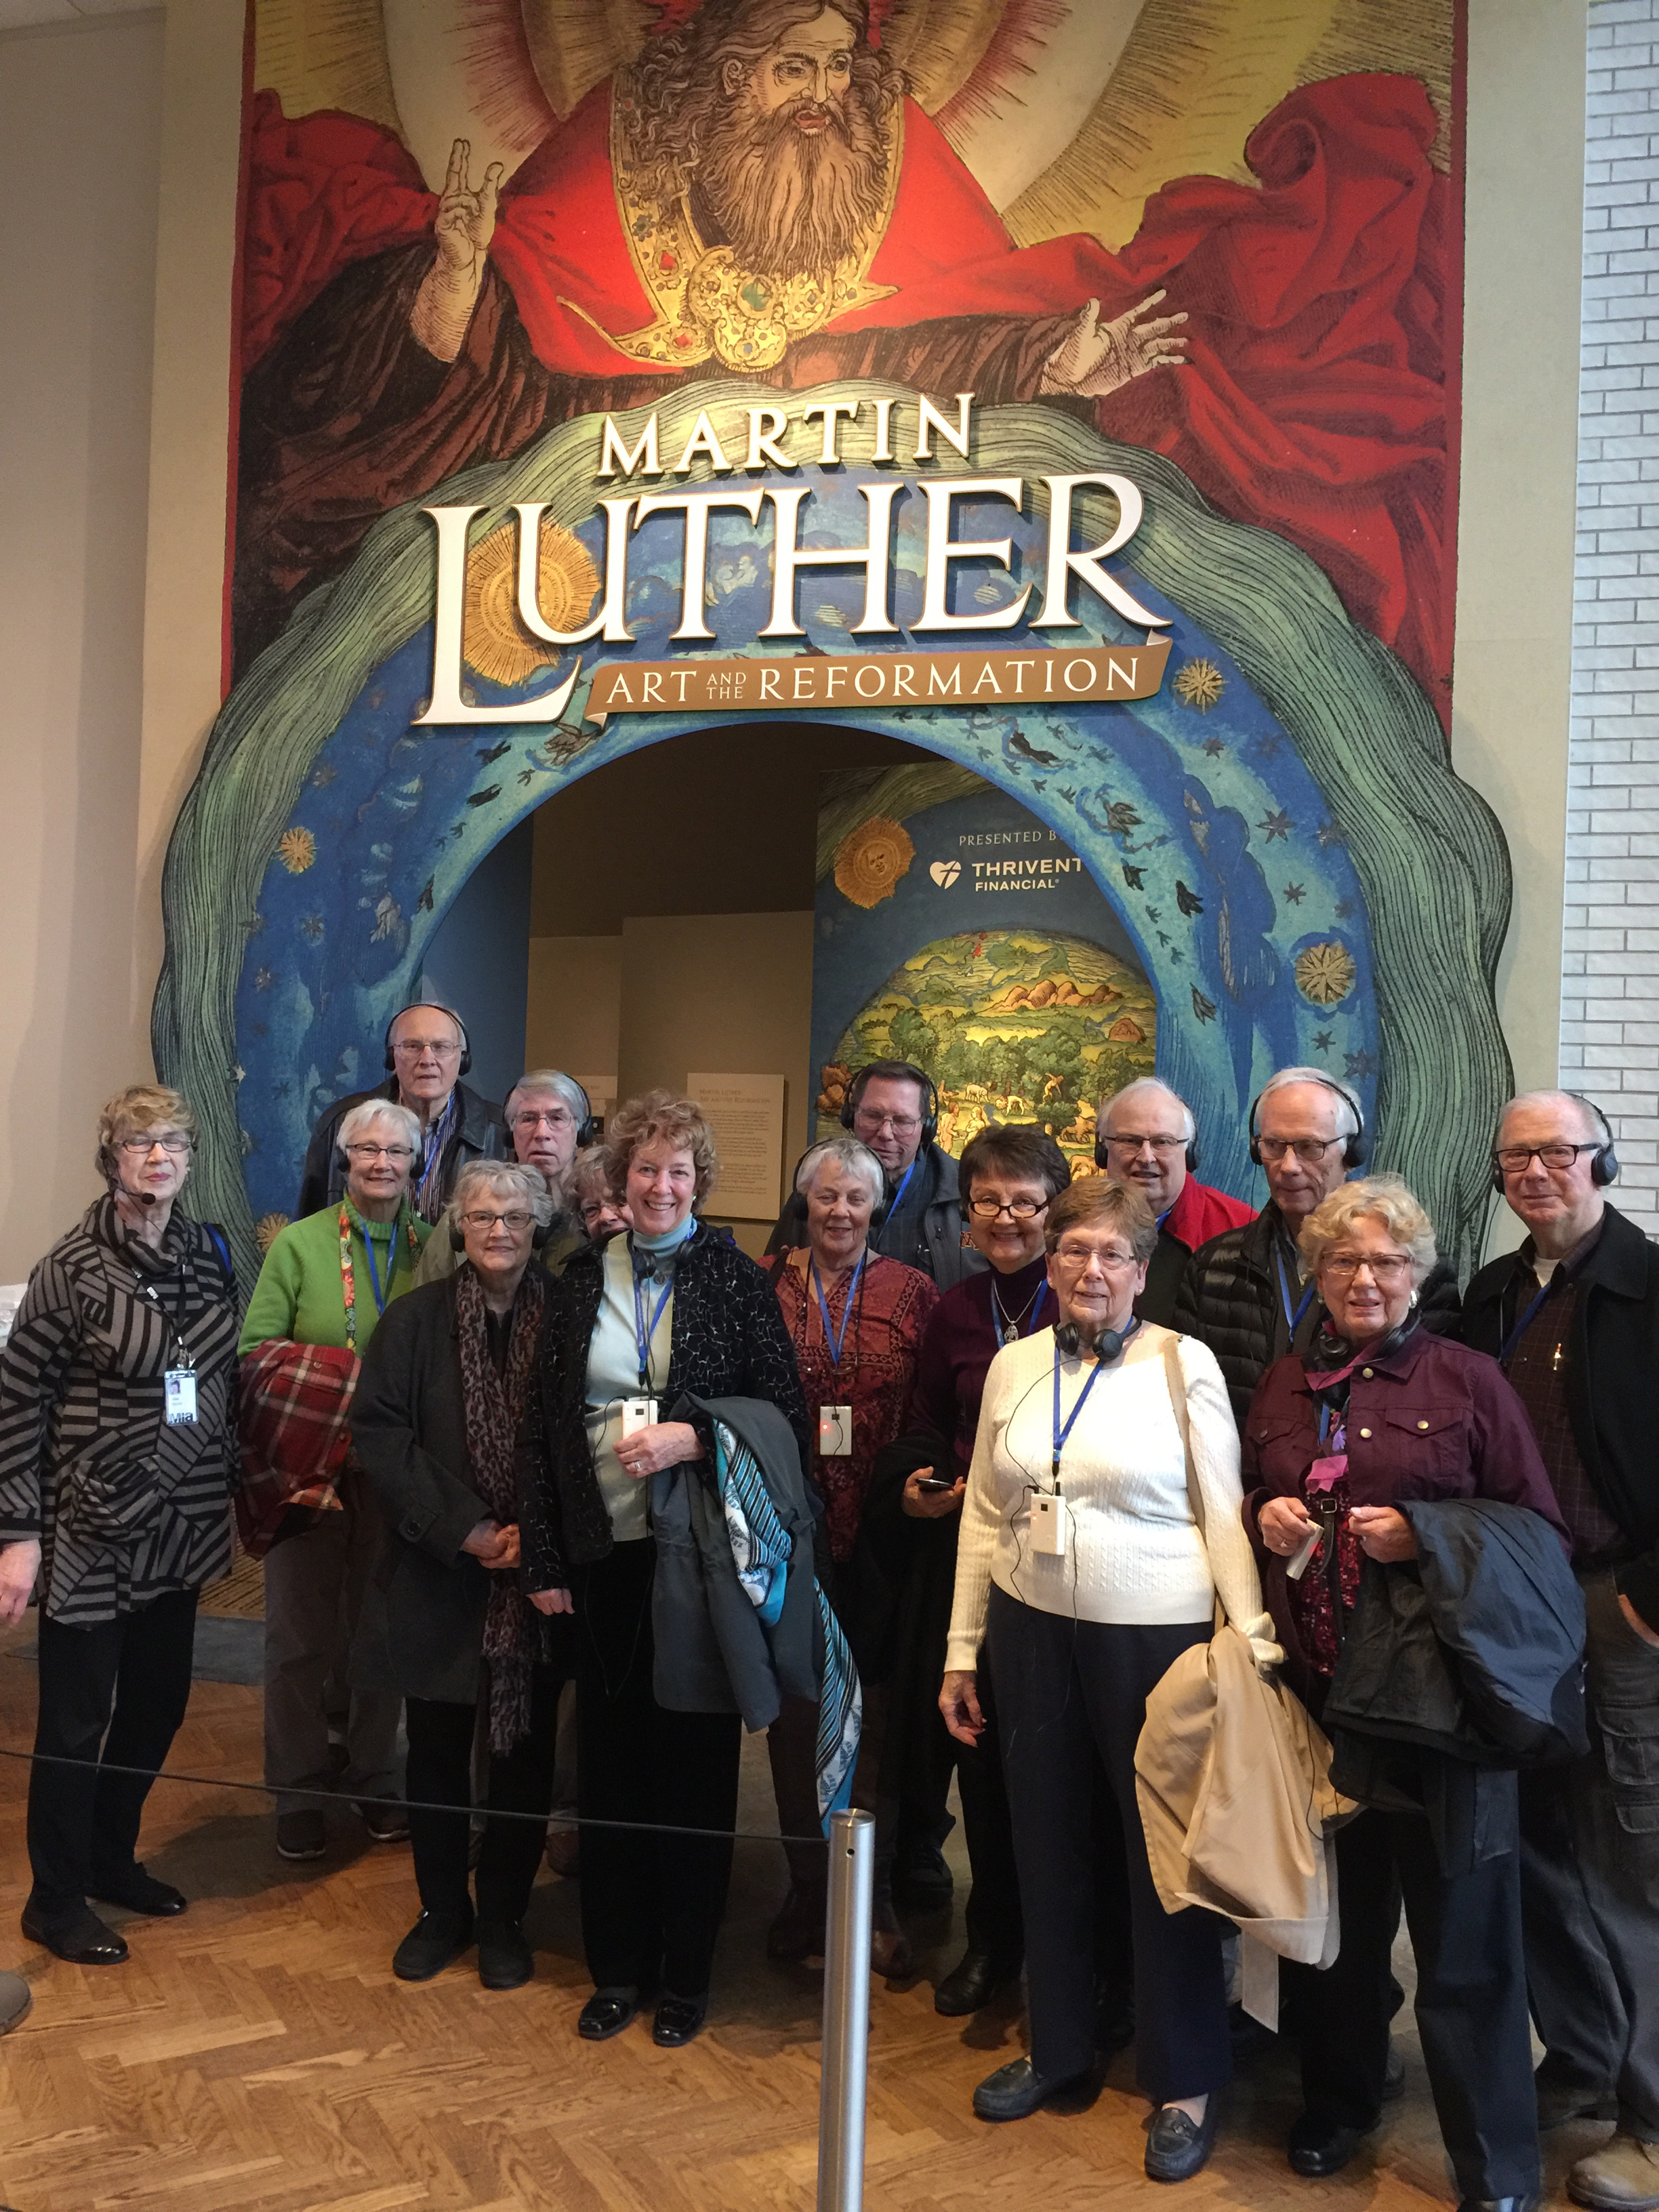 Senior Citizens at the Martin Luther exhibit at Minneapolis Institute of the Arts